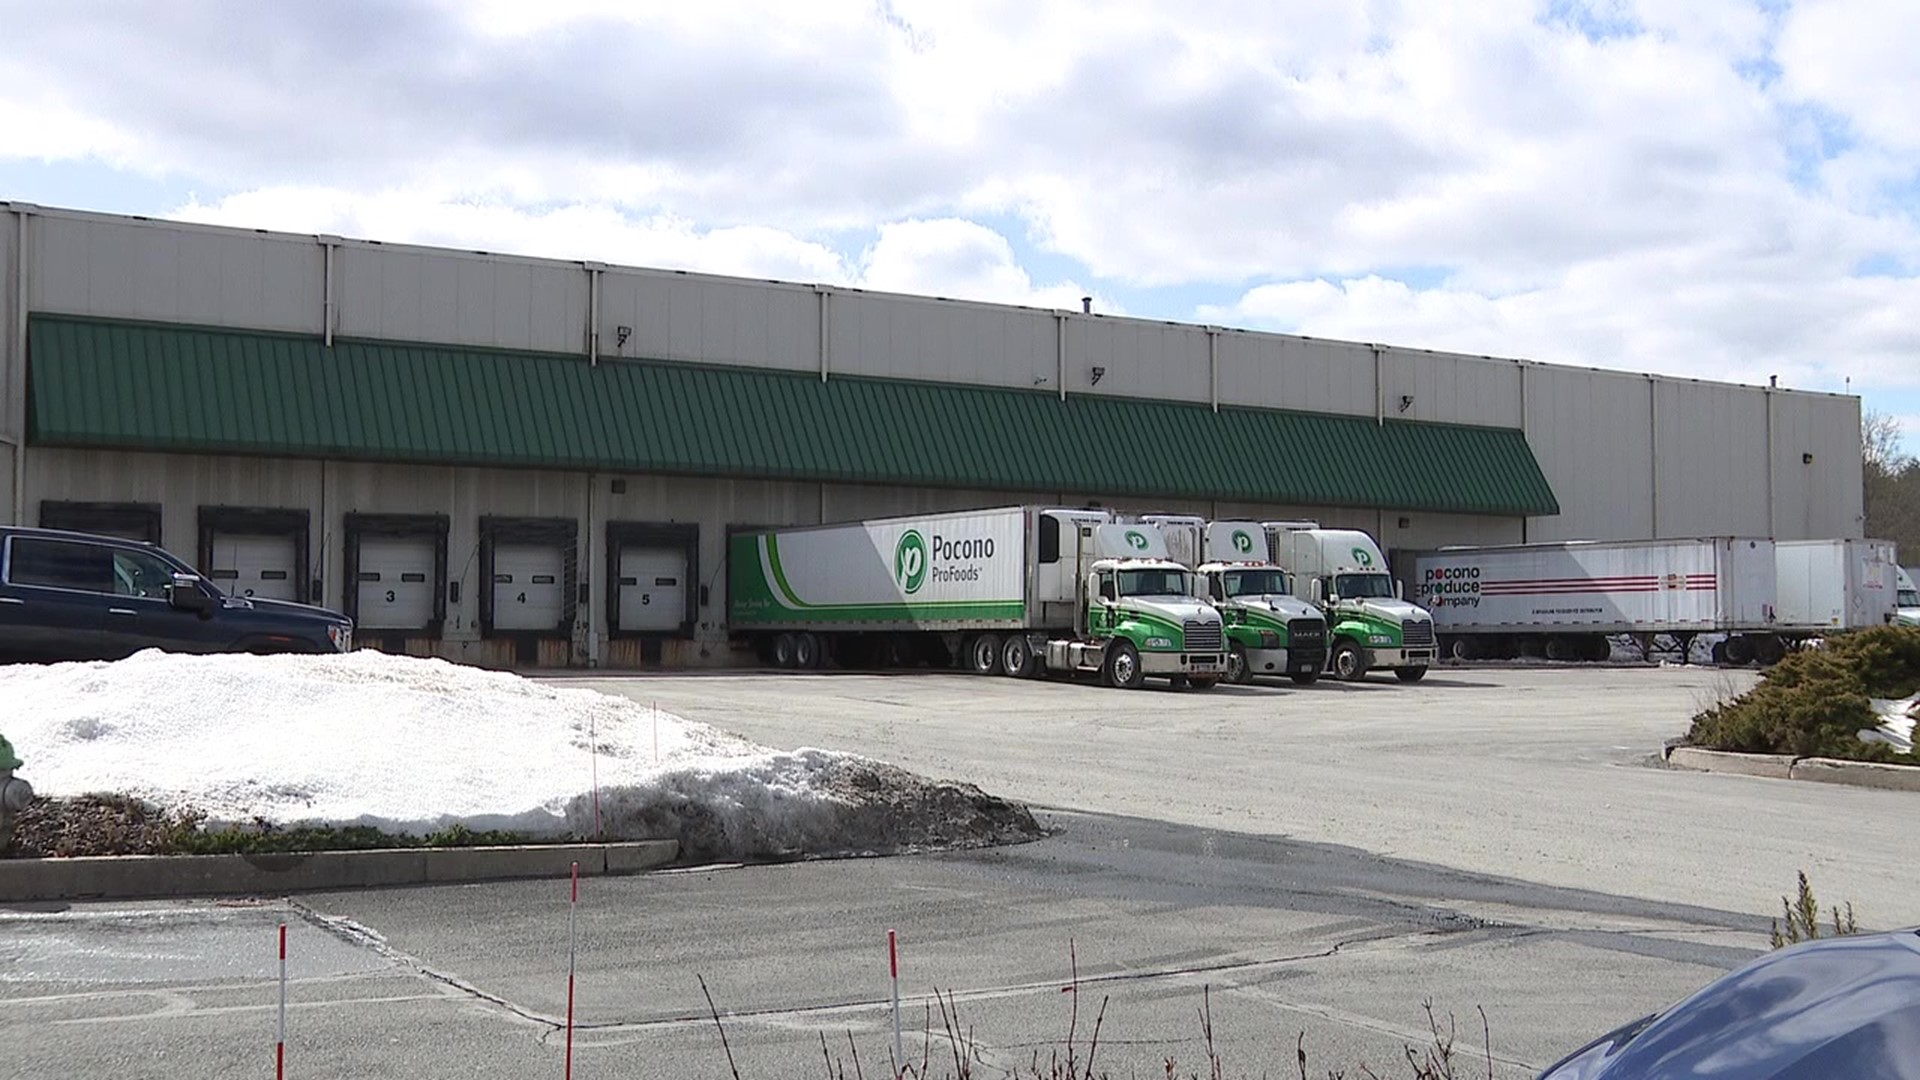 Driscoll Foods out of New Jersey bought Pocono ProFoods in Stroud Township.